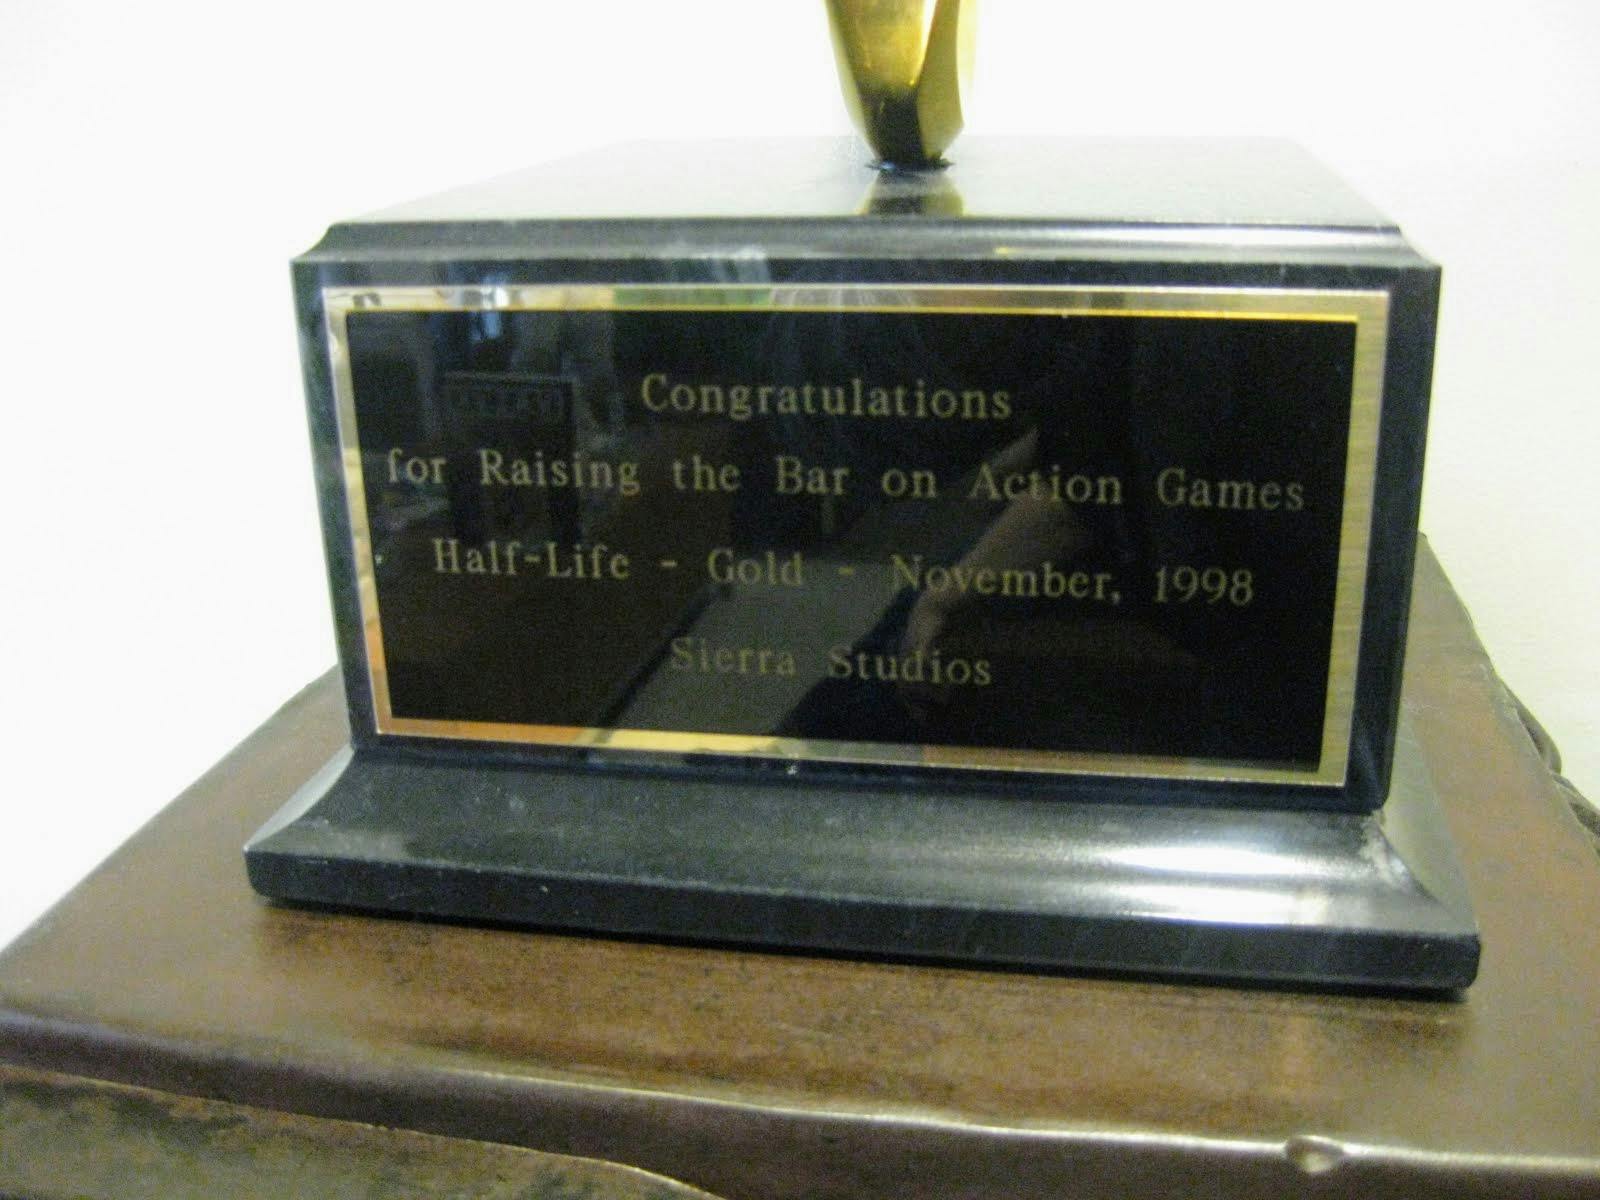 Plaque that states 'Congratulations for Raising the Bar on Action Games.
Half-Life - Gold - November, 1998. Sierra
Studios'